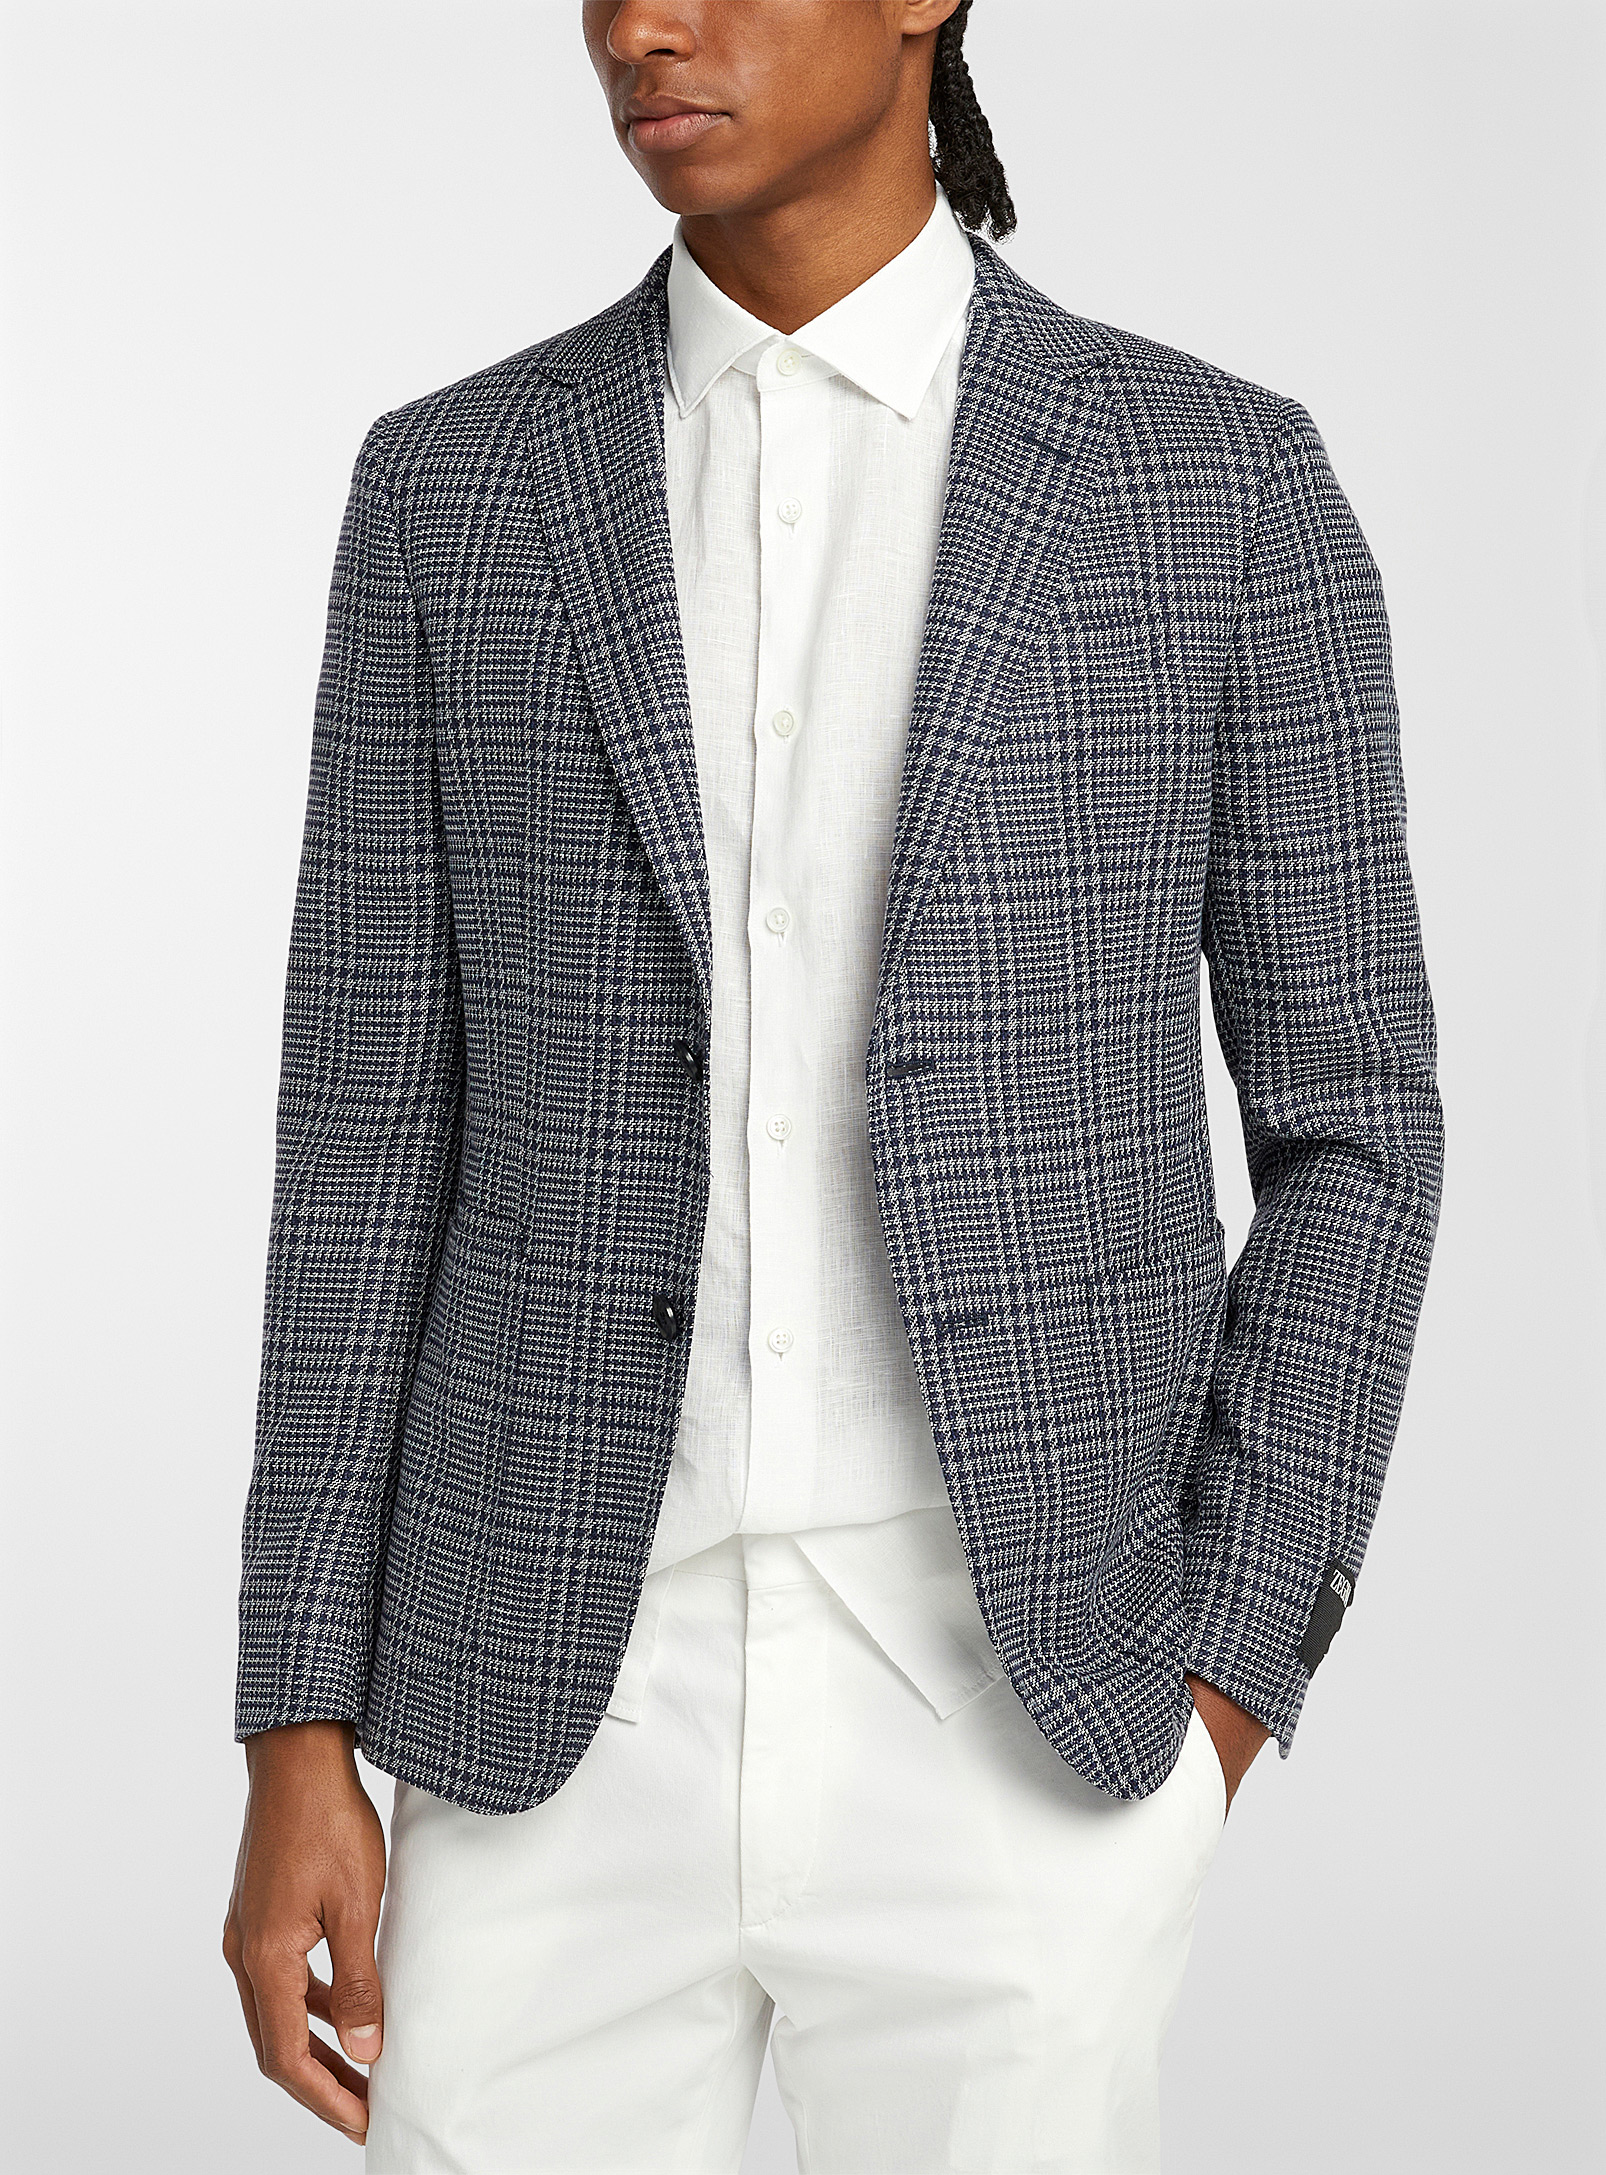 Zegna - Men's Silk and wool Prince of Wales jacket